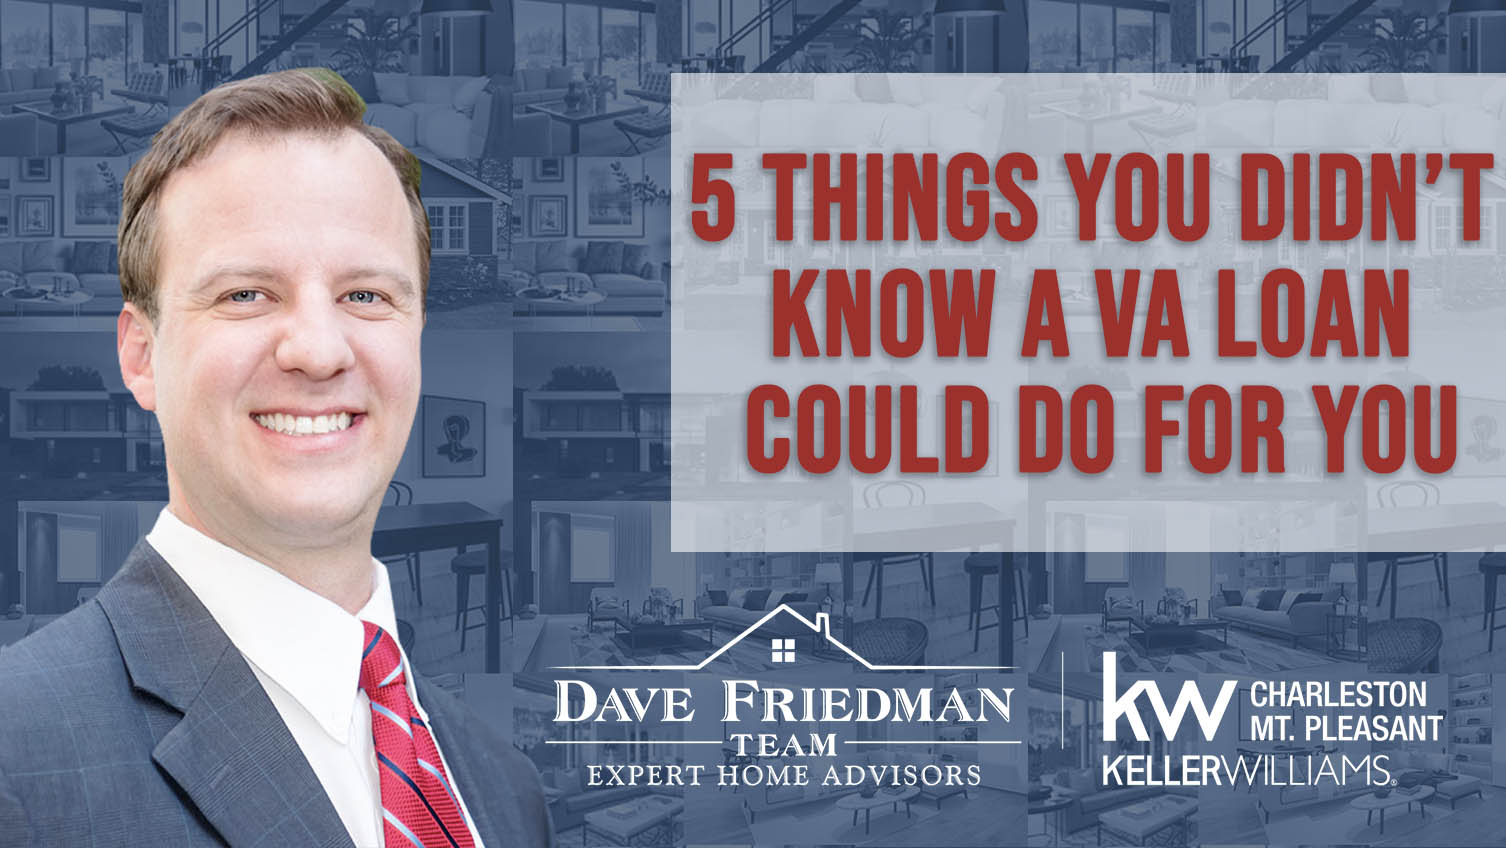 5 Things You Didn’t Know a VA Loan Could Do for You